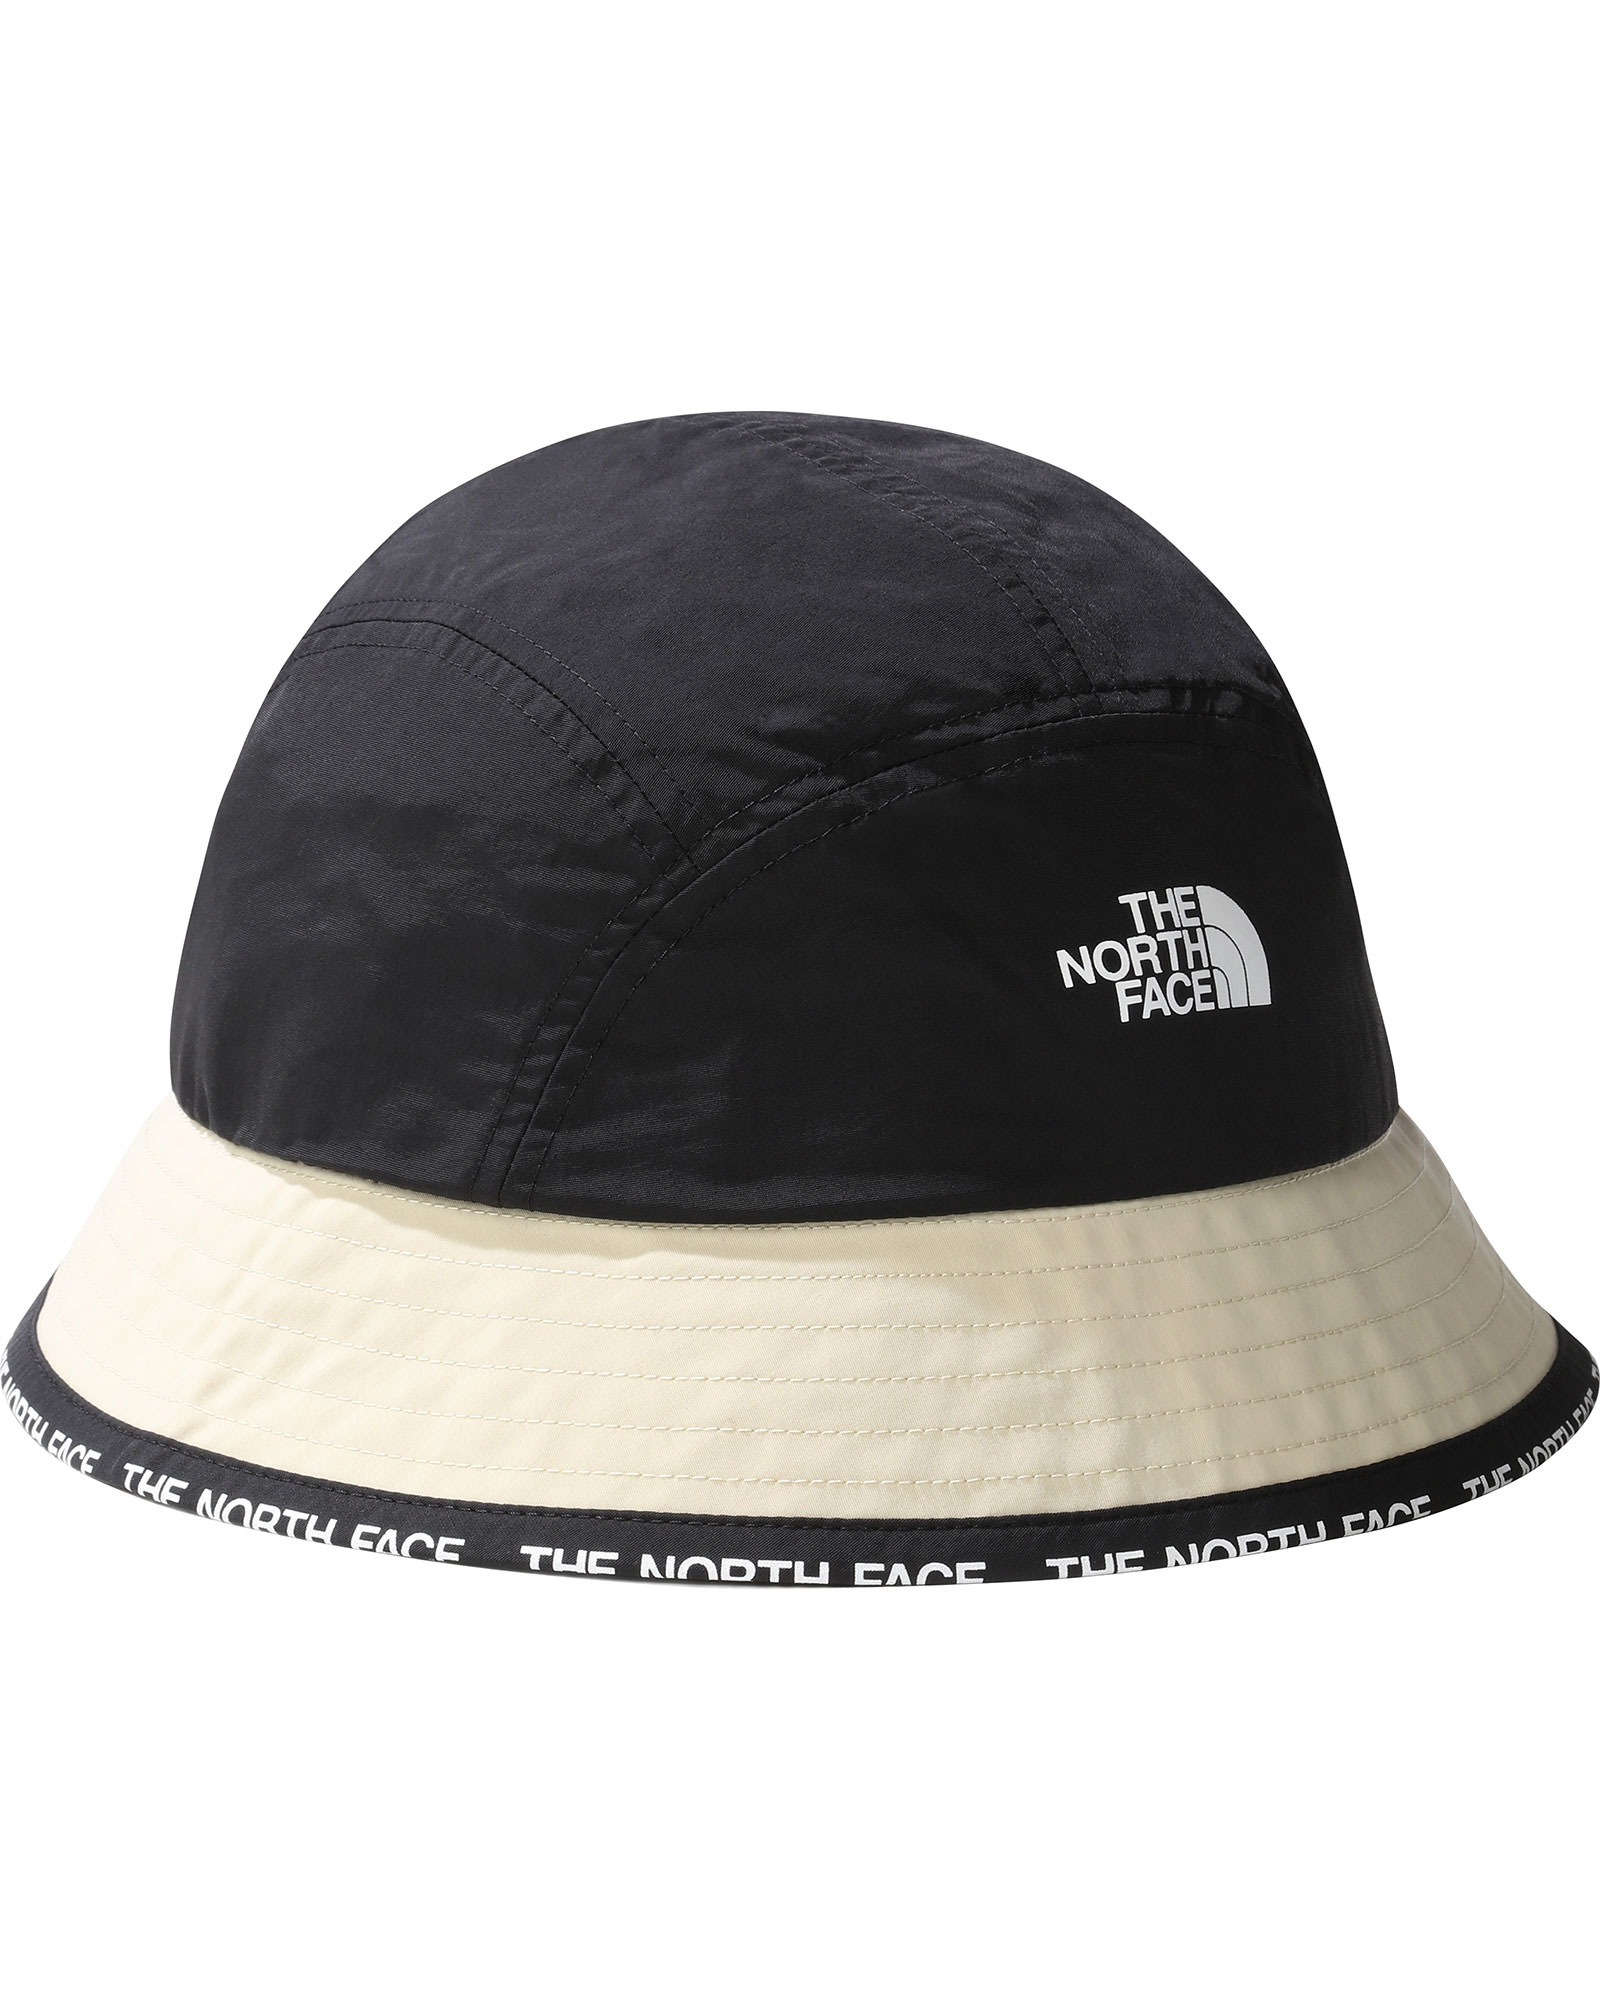 The North Face Cypress Bucket Hat - Gravel S/M